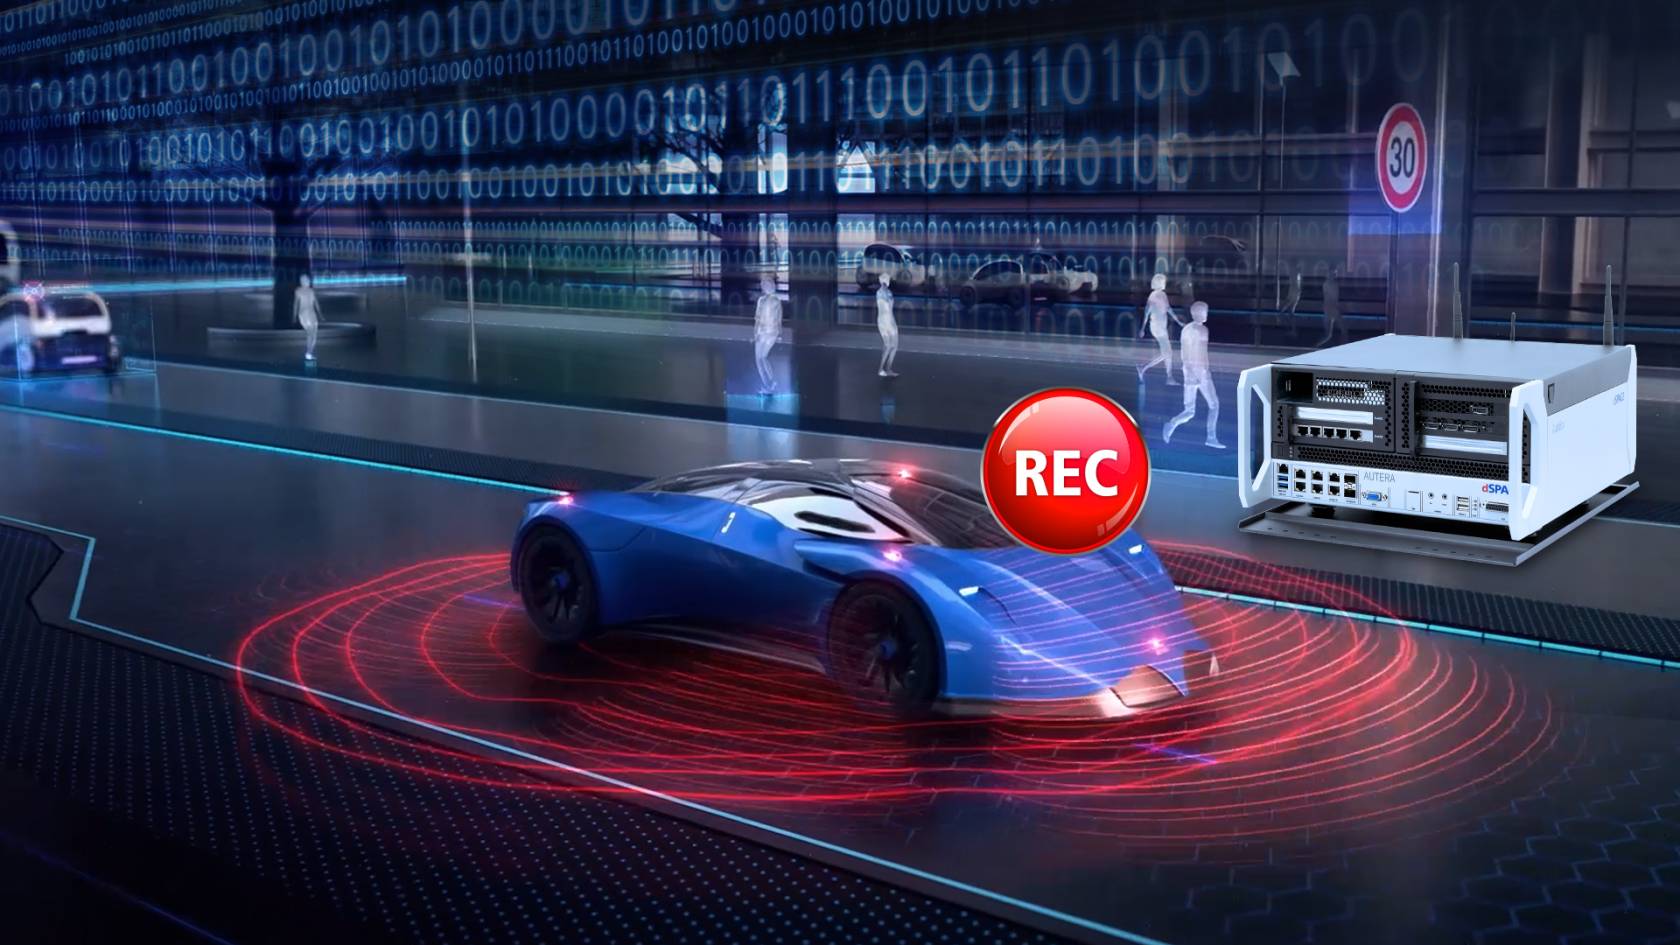 Make ADAS/AD data available faster and at lower cost